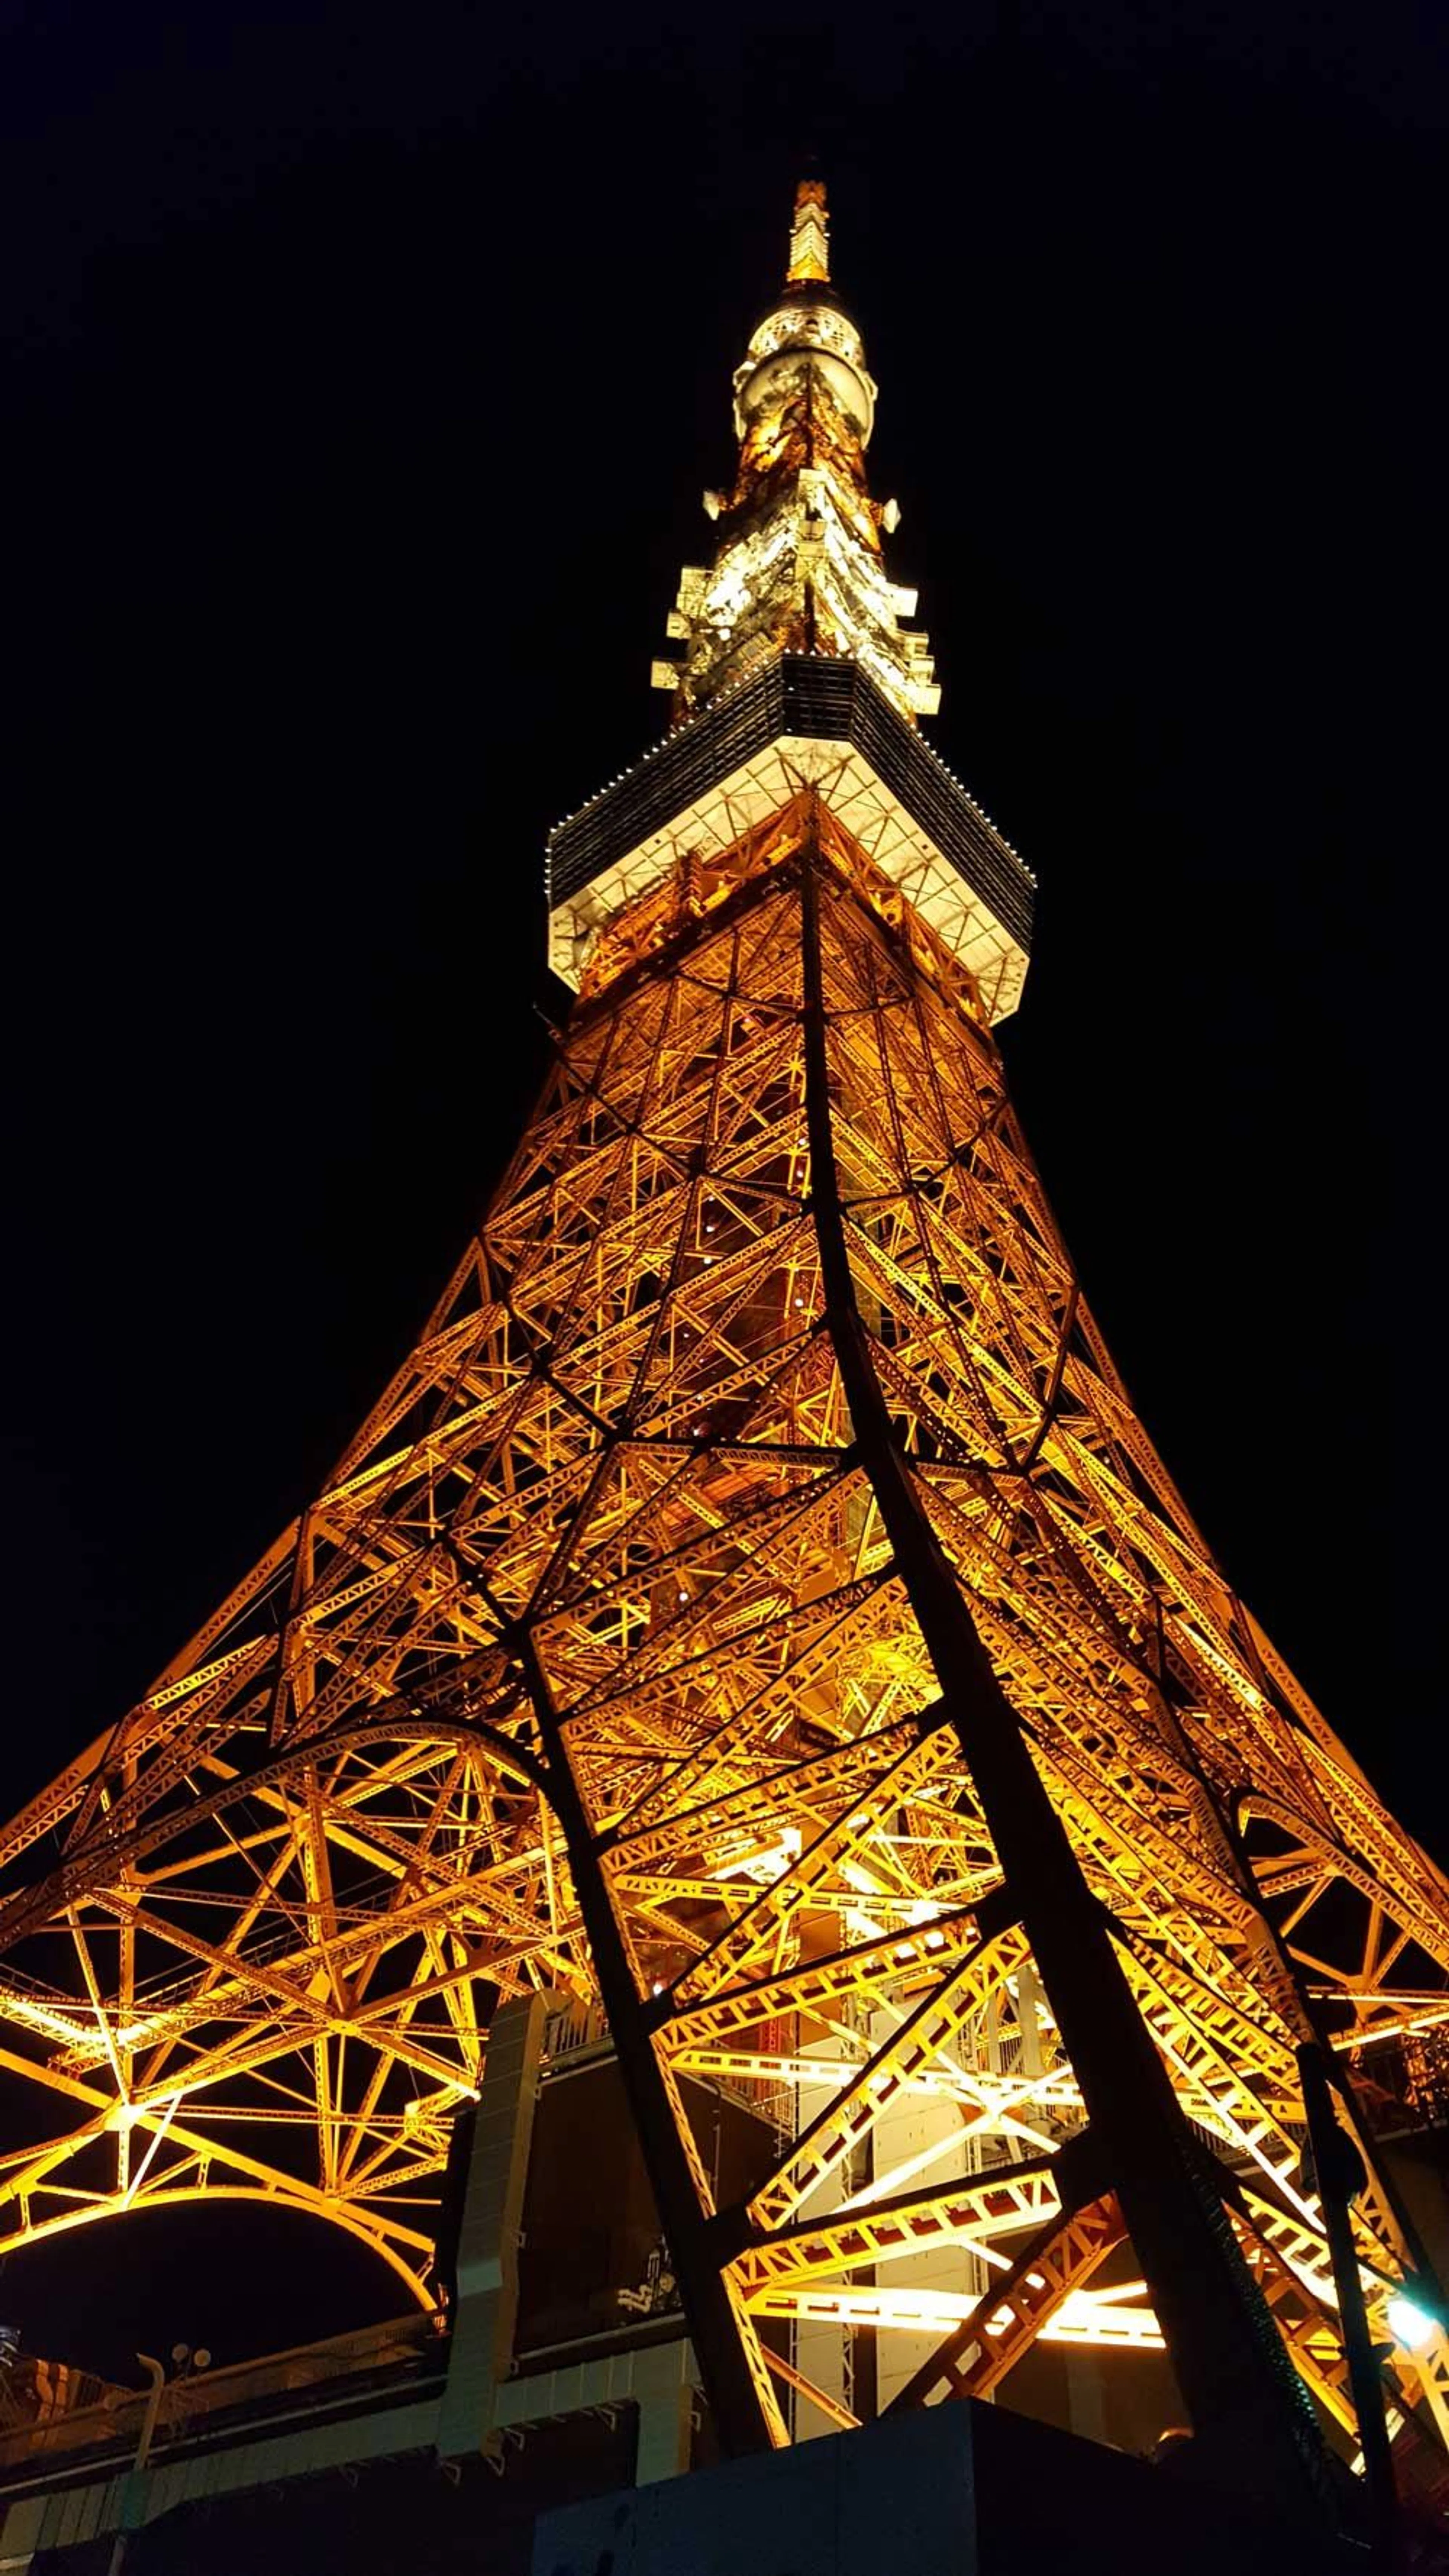 The golden lights of Tokyo Tower at night